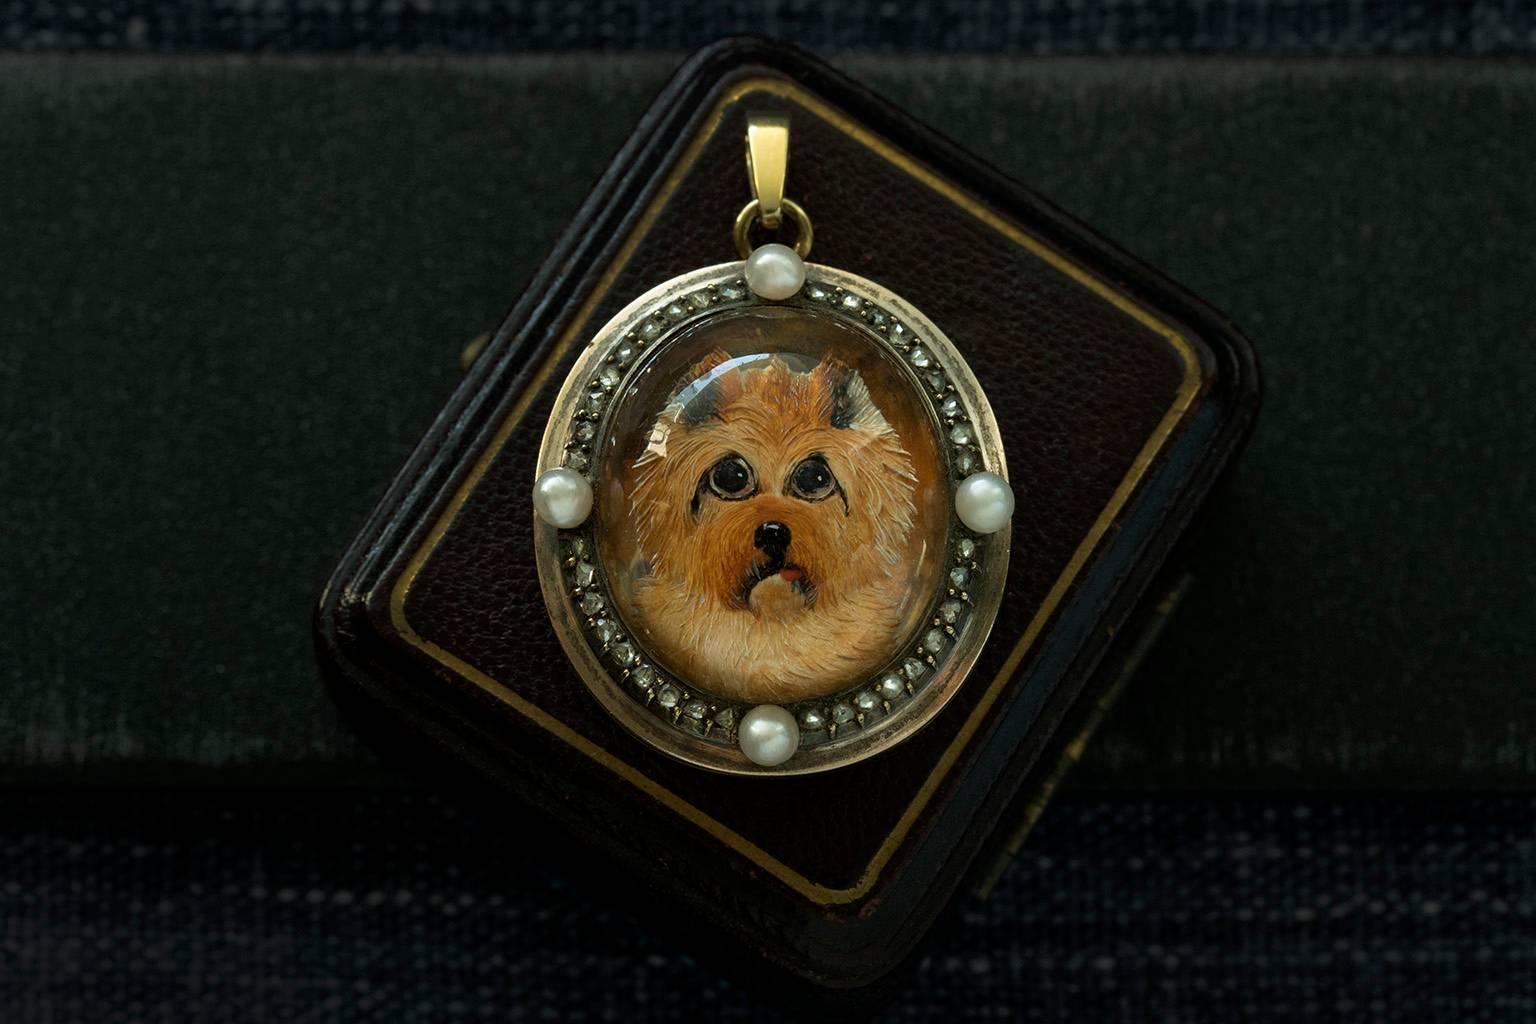 An adorable Victorian Essex crystal reverse intaglio locket. This 18k gold locket features a Norwich terrier surrounded by rose cut diamond row and extra pearls at four additional points. The technique of reverse intaglio crystal carving required